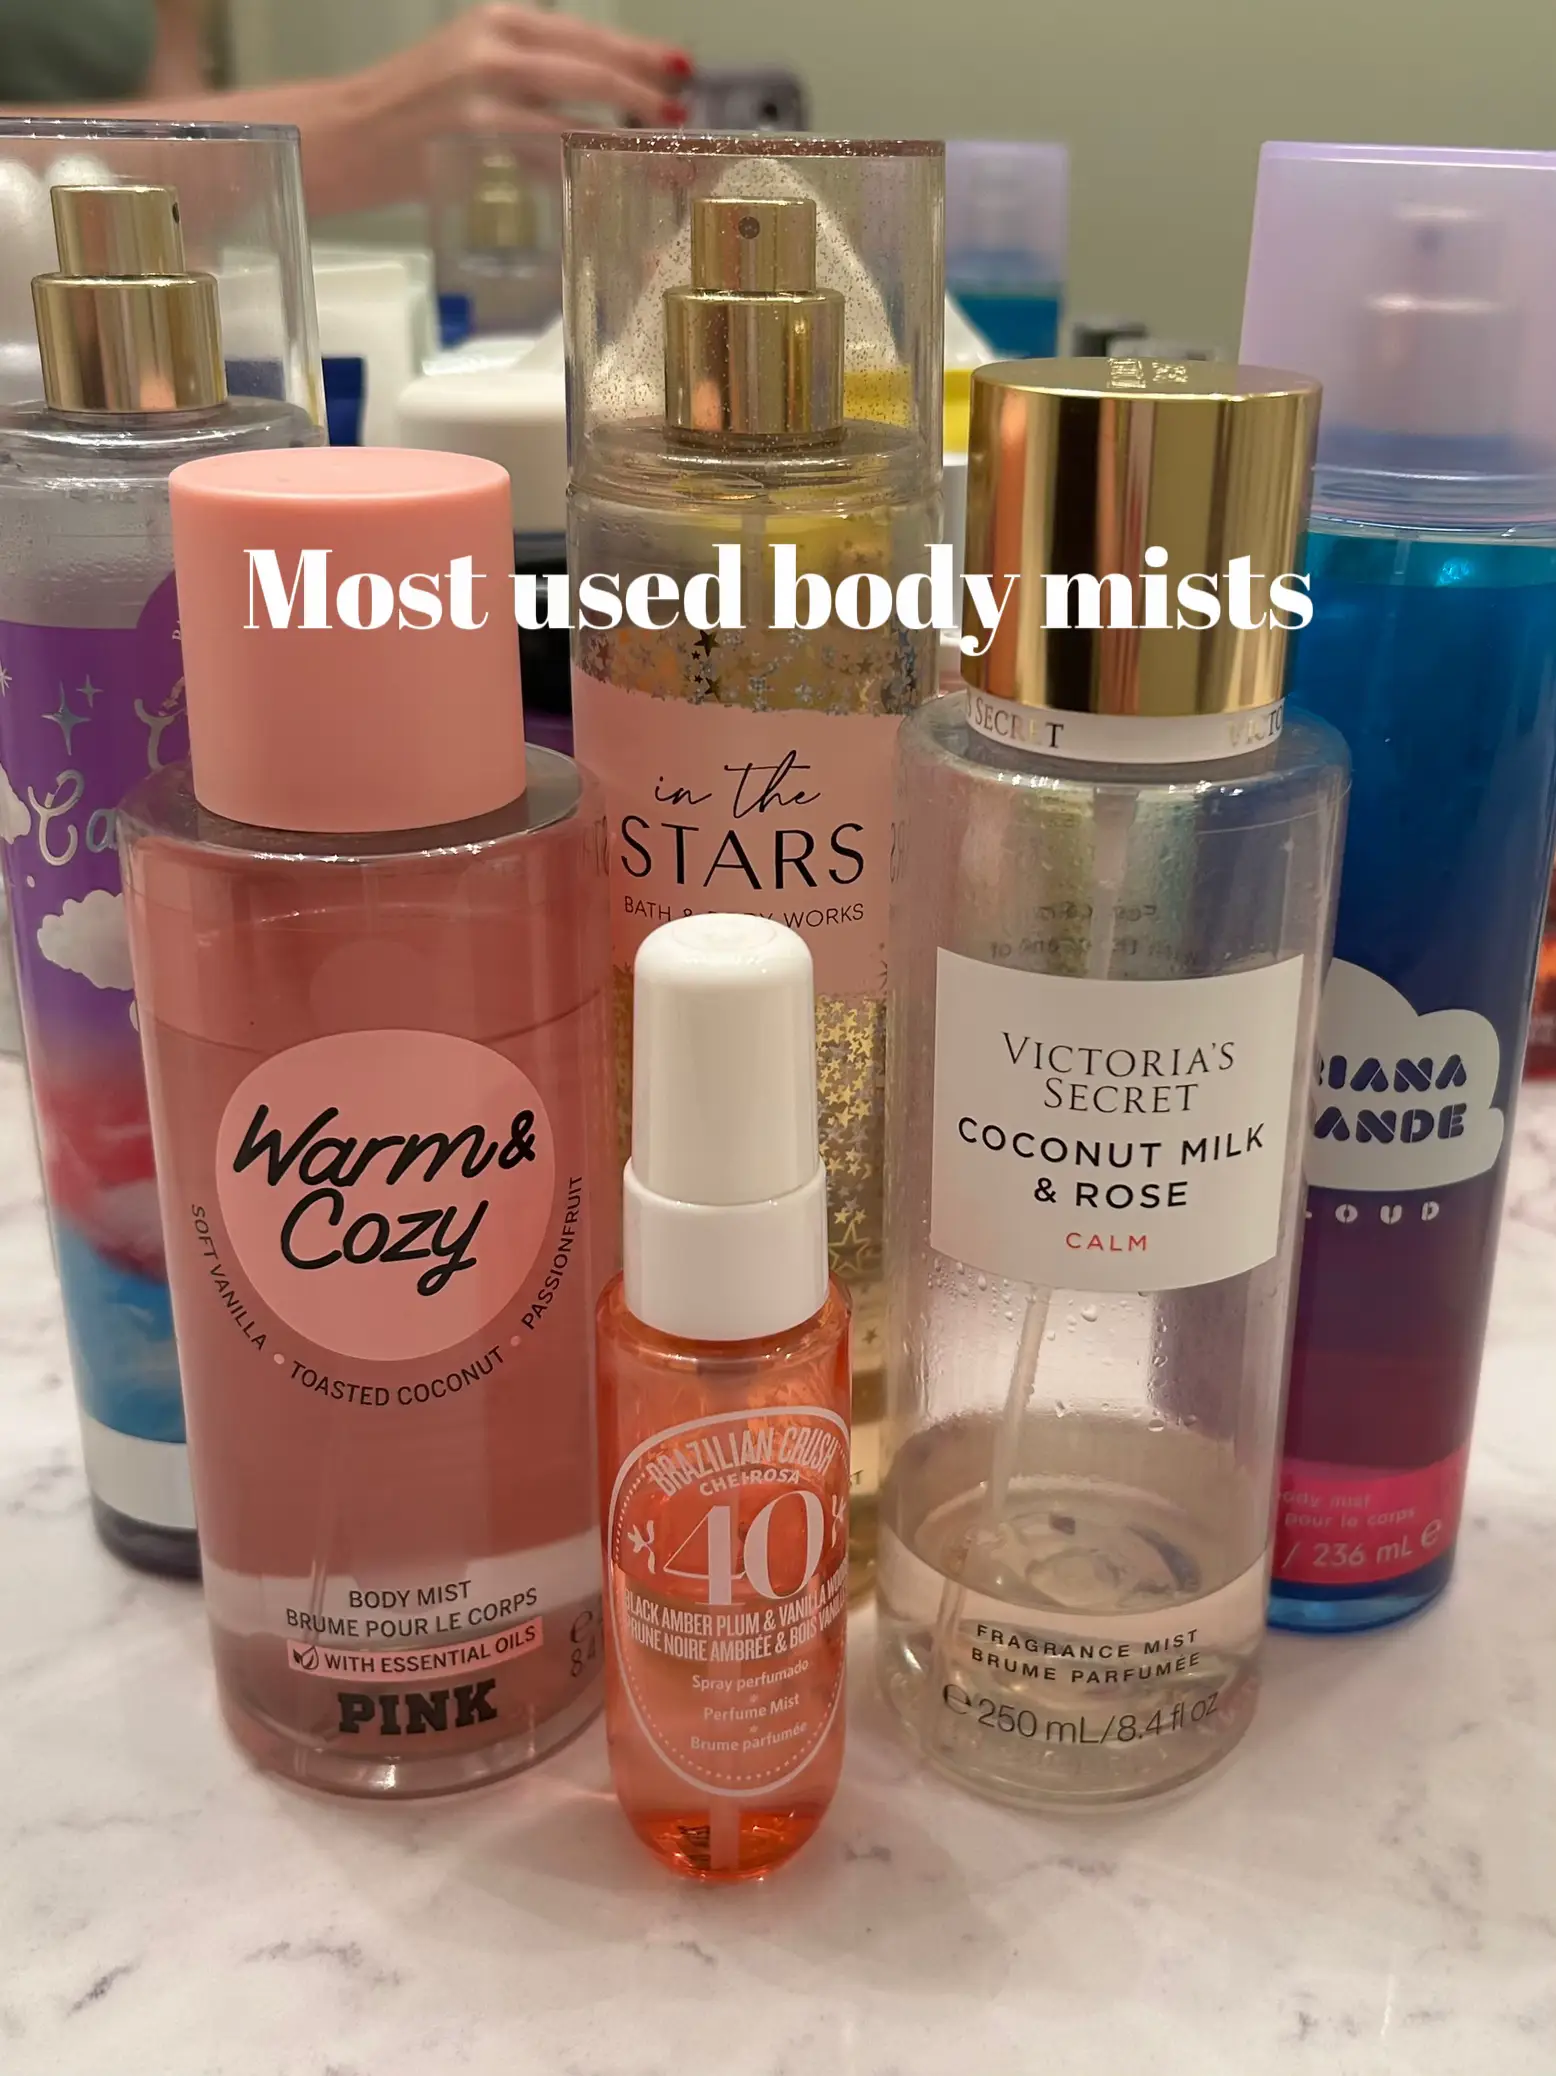 Most used body mists, Gallery posted by Julia Like